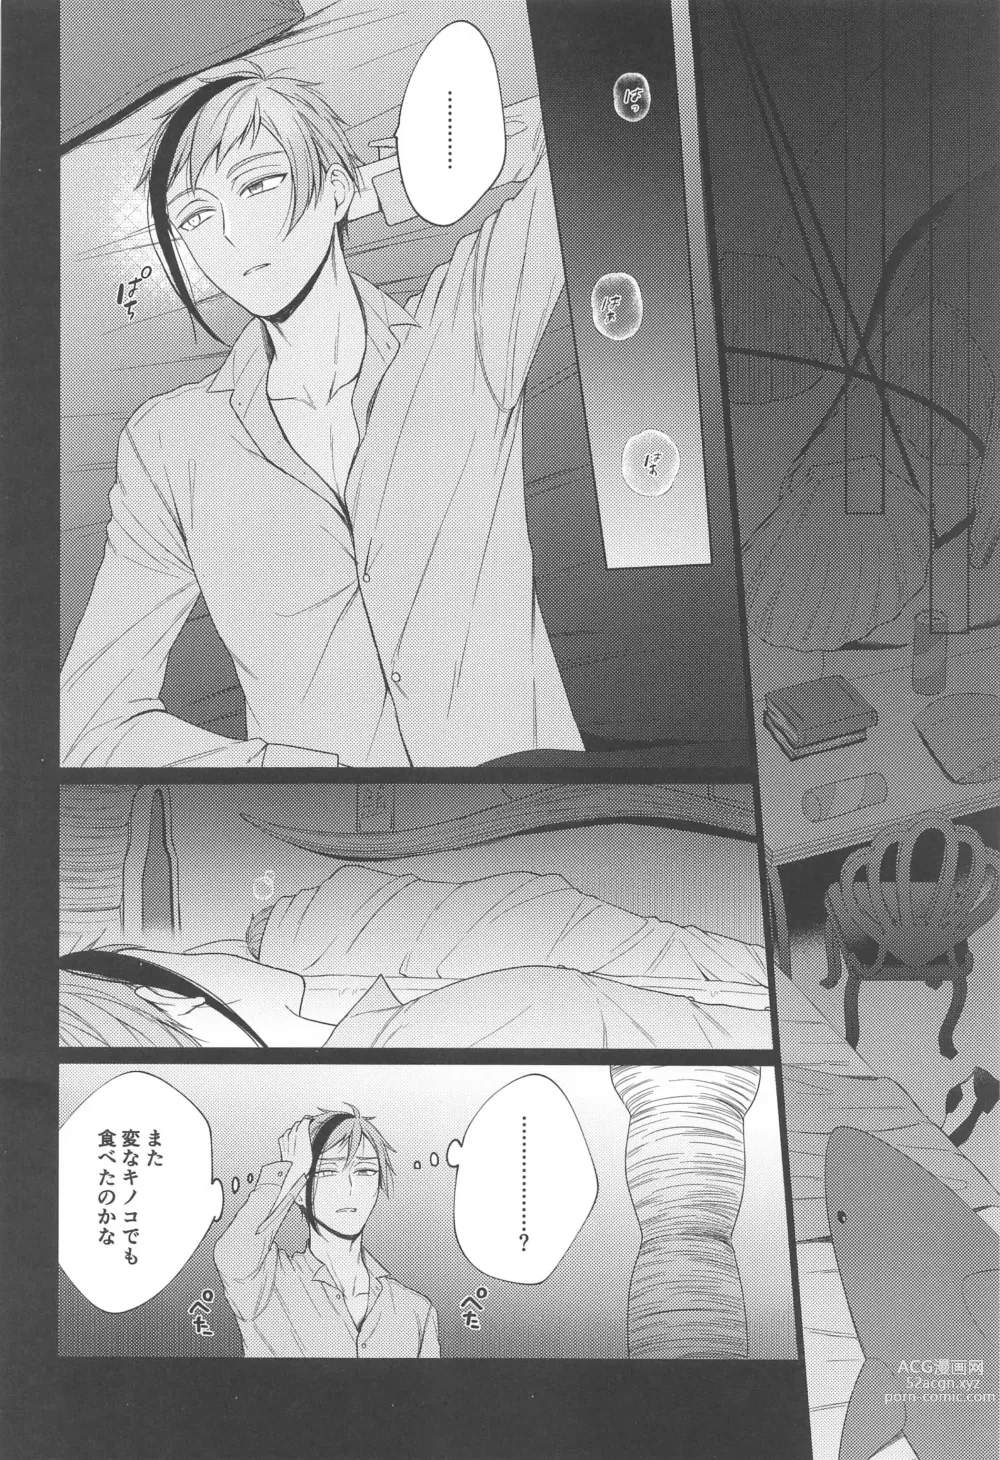 Page 15 of doujinshi Lovesick five days.